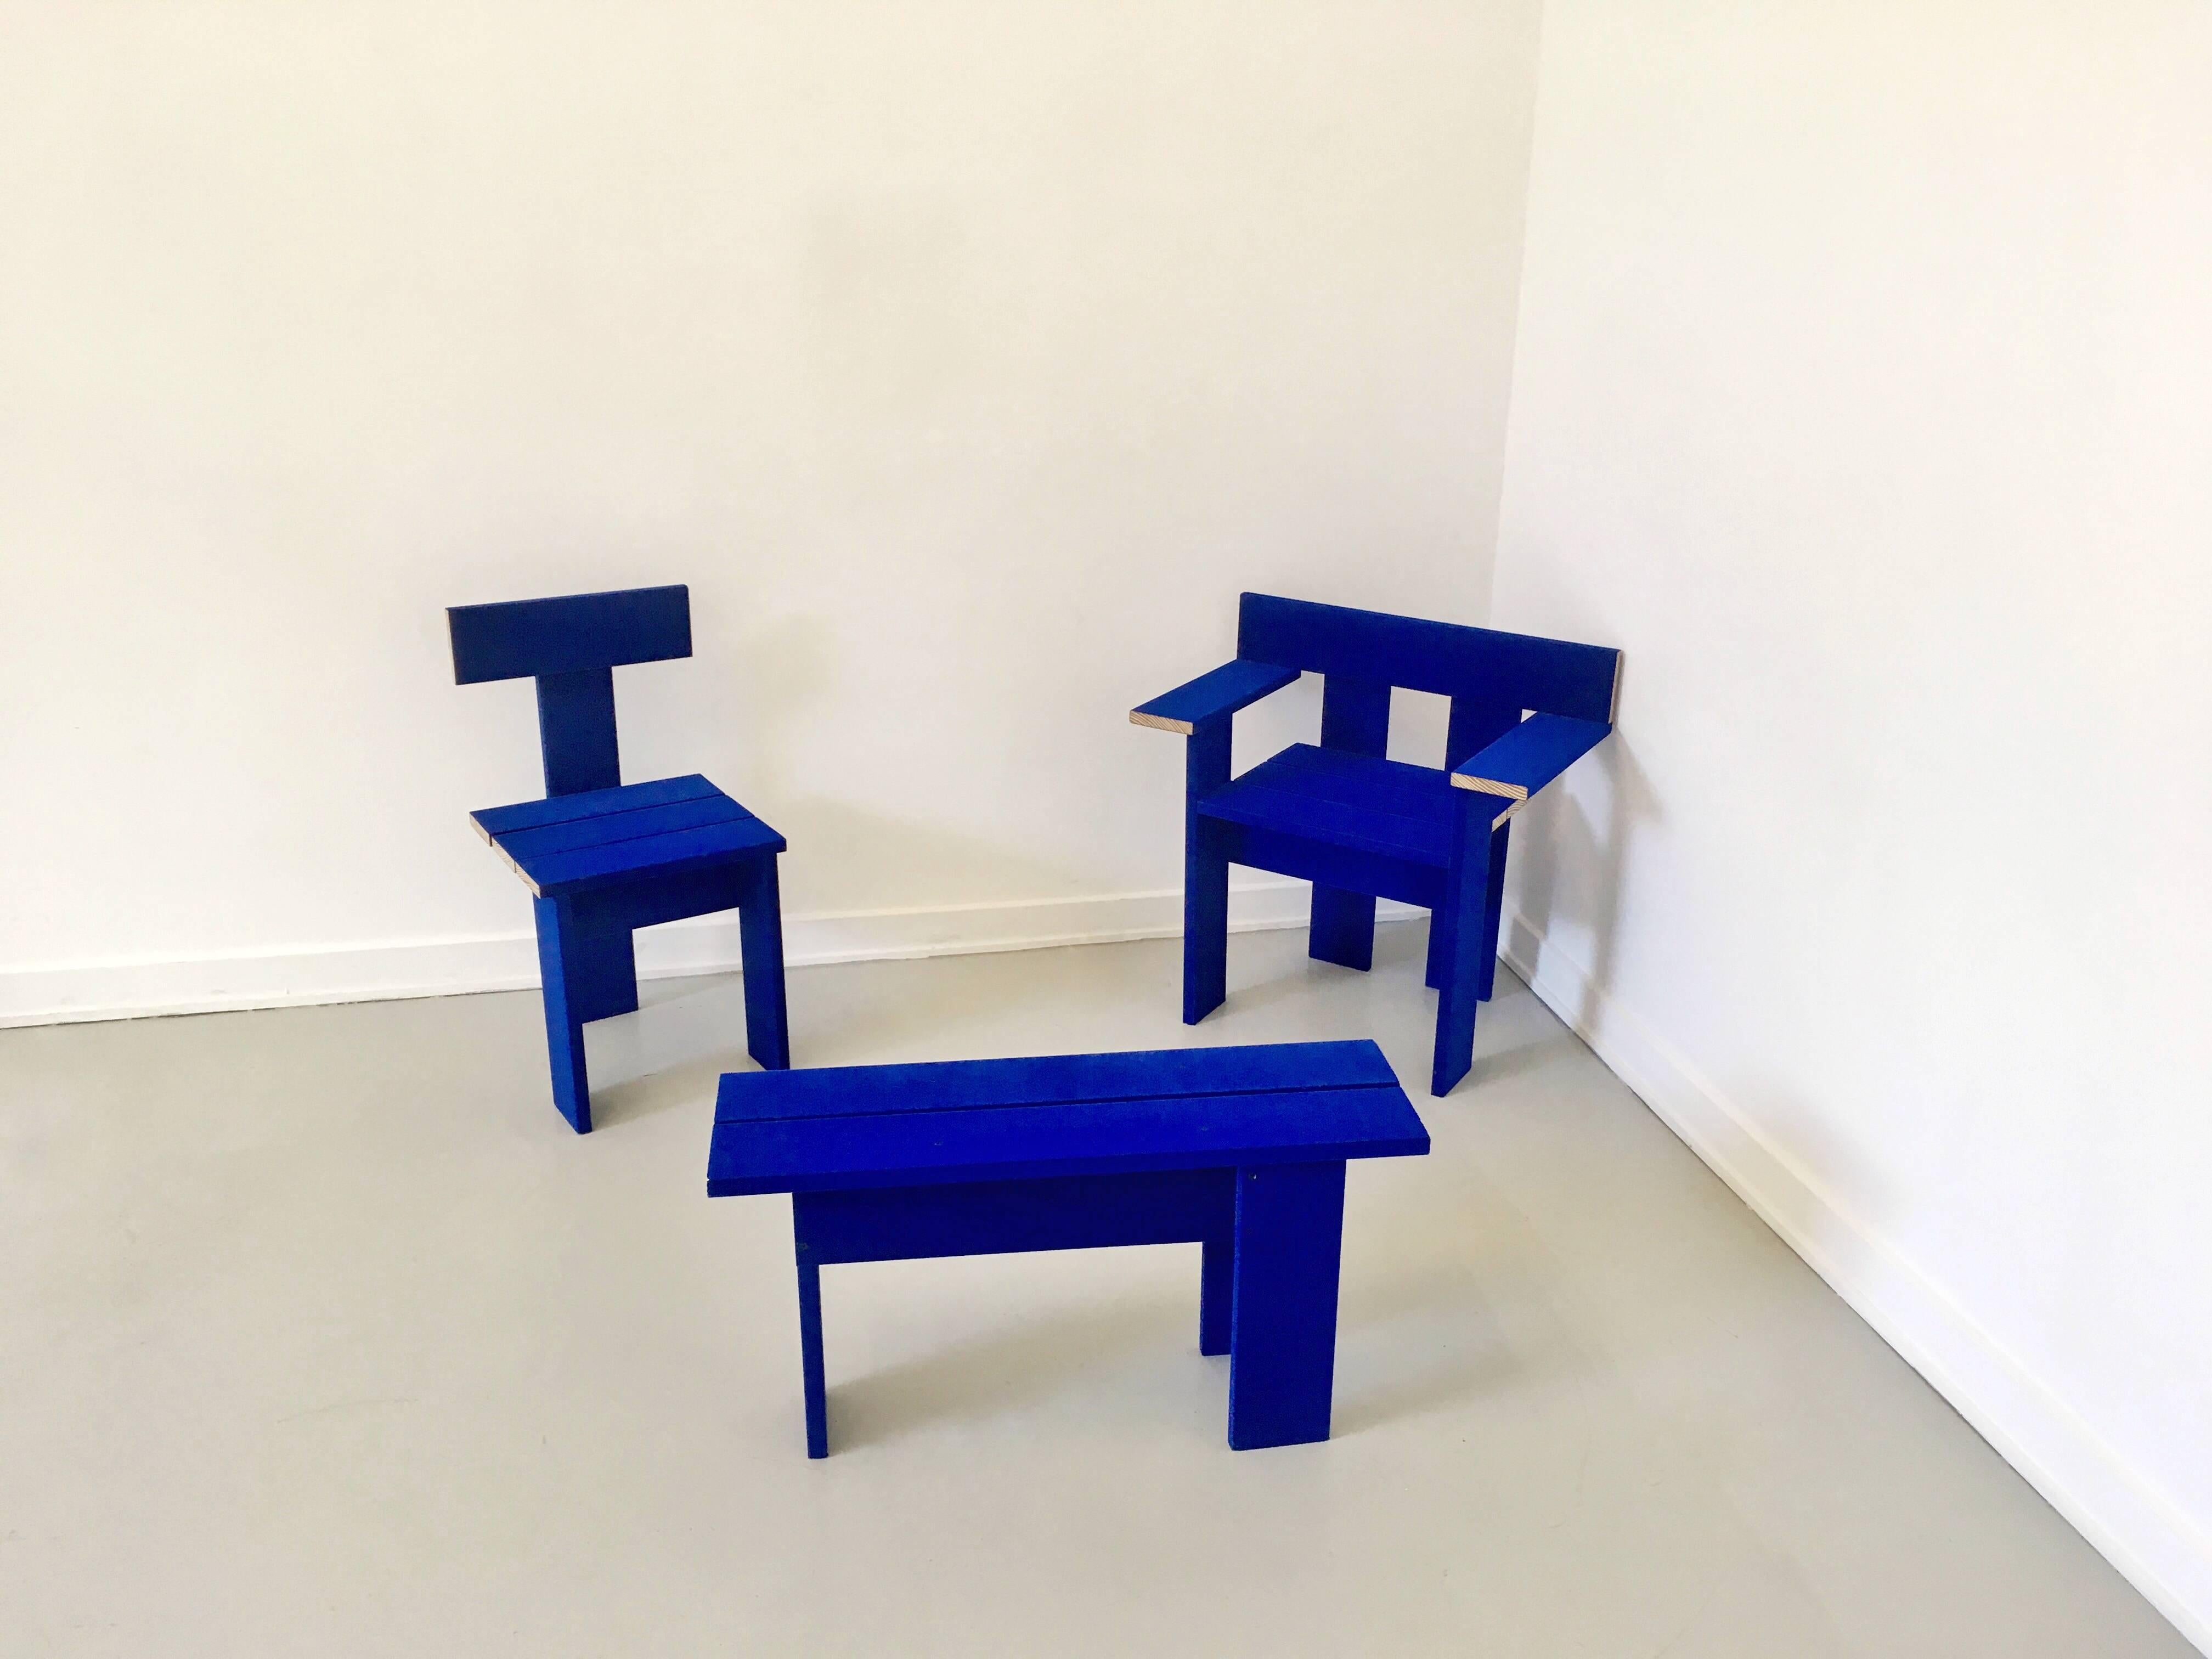 Blue textile covered wooden armchair by London based design duo Soft Baroque, previously shown at Het Nieuwe Institut.

Renderings are becoming more diabolic and sophisticated, representations of reality are appearing in higher resolution. Meanwhile